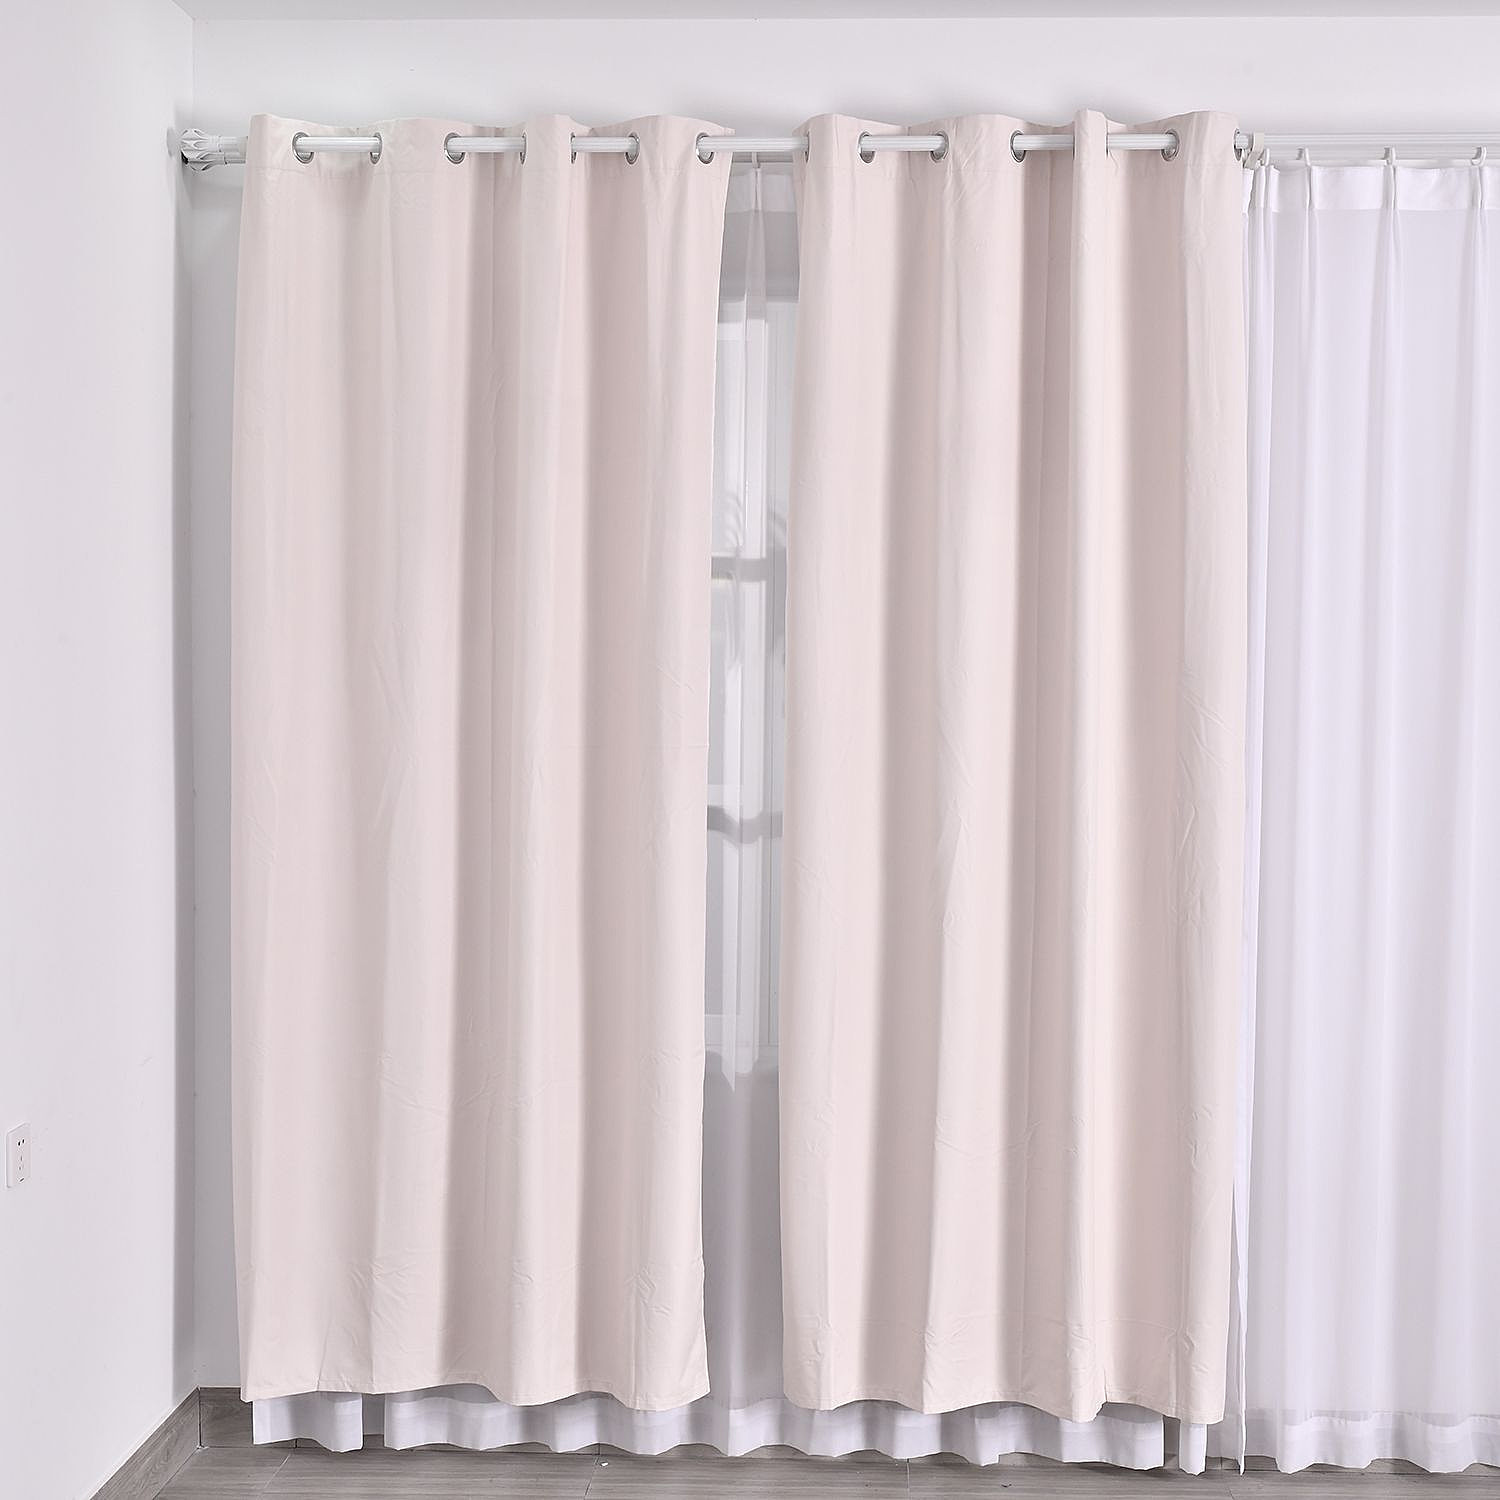 Homesmart-Polyester-Solid-Curtain-and-Blind-Size-132x1-cm-Blush-Blue